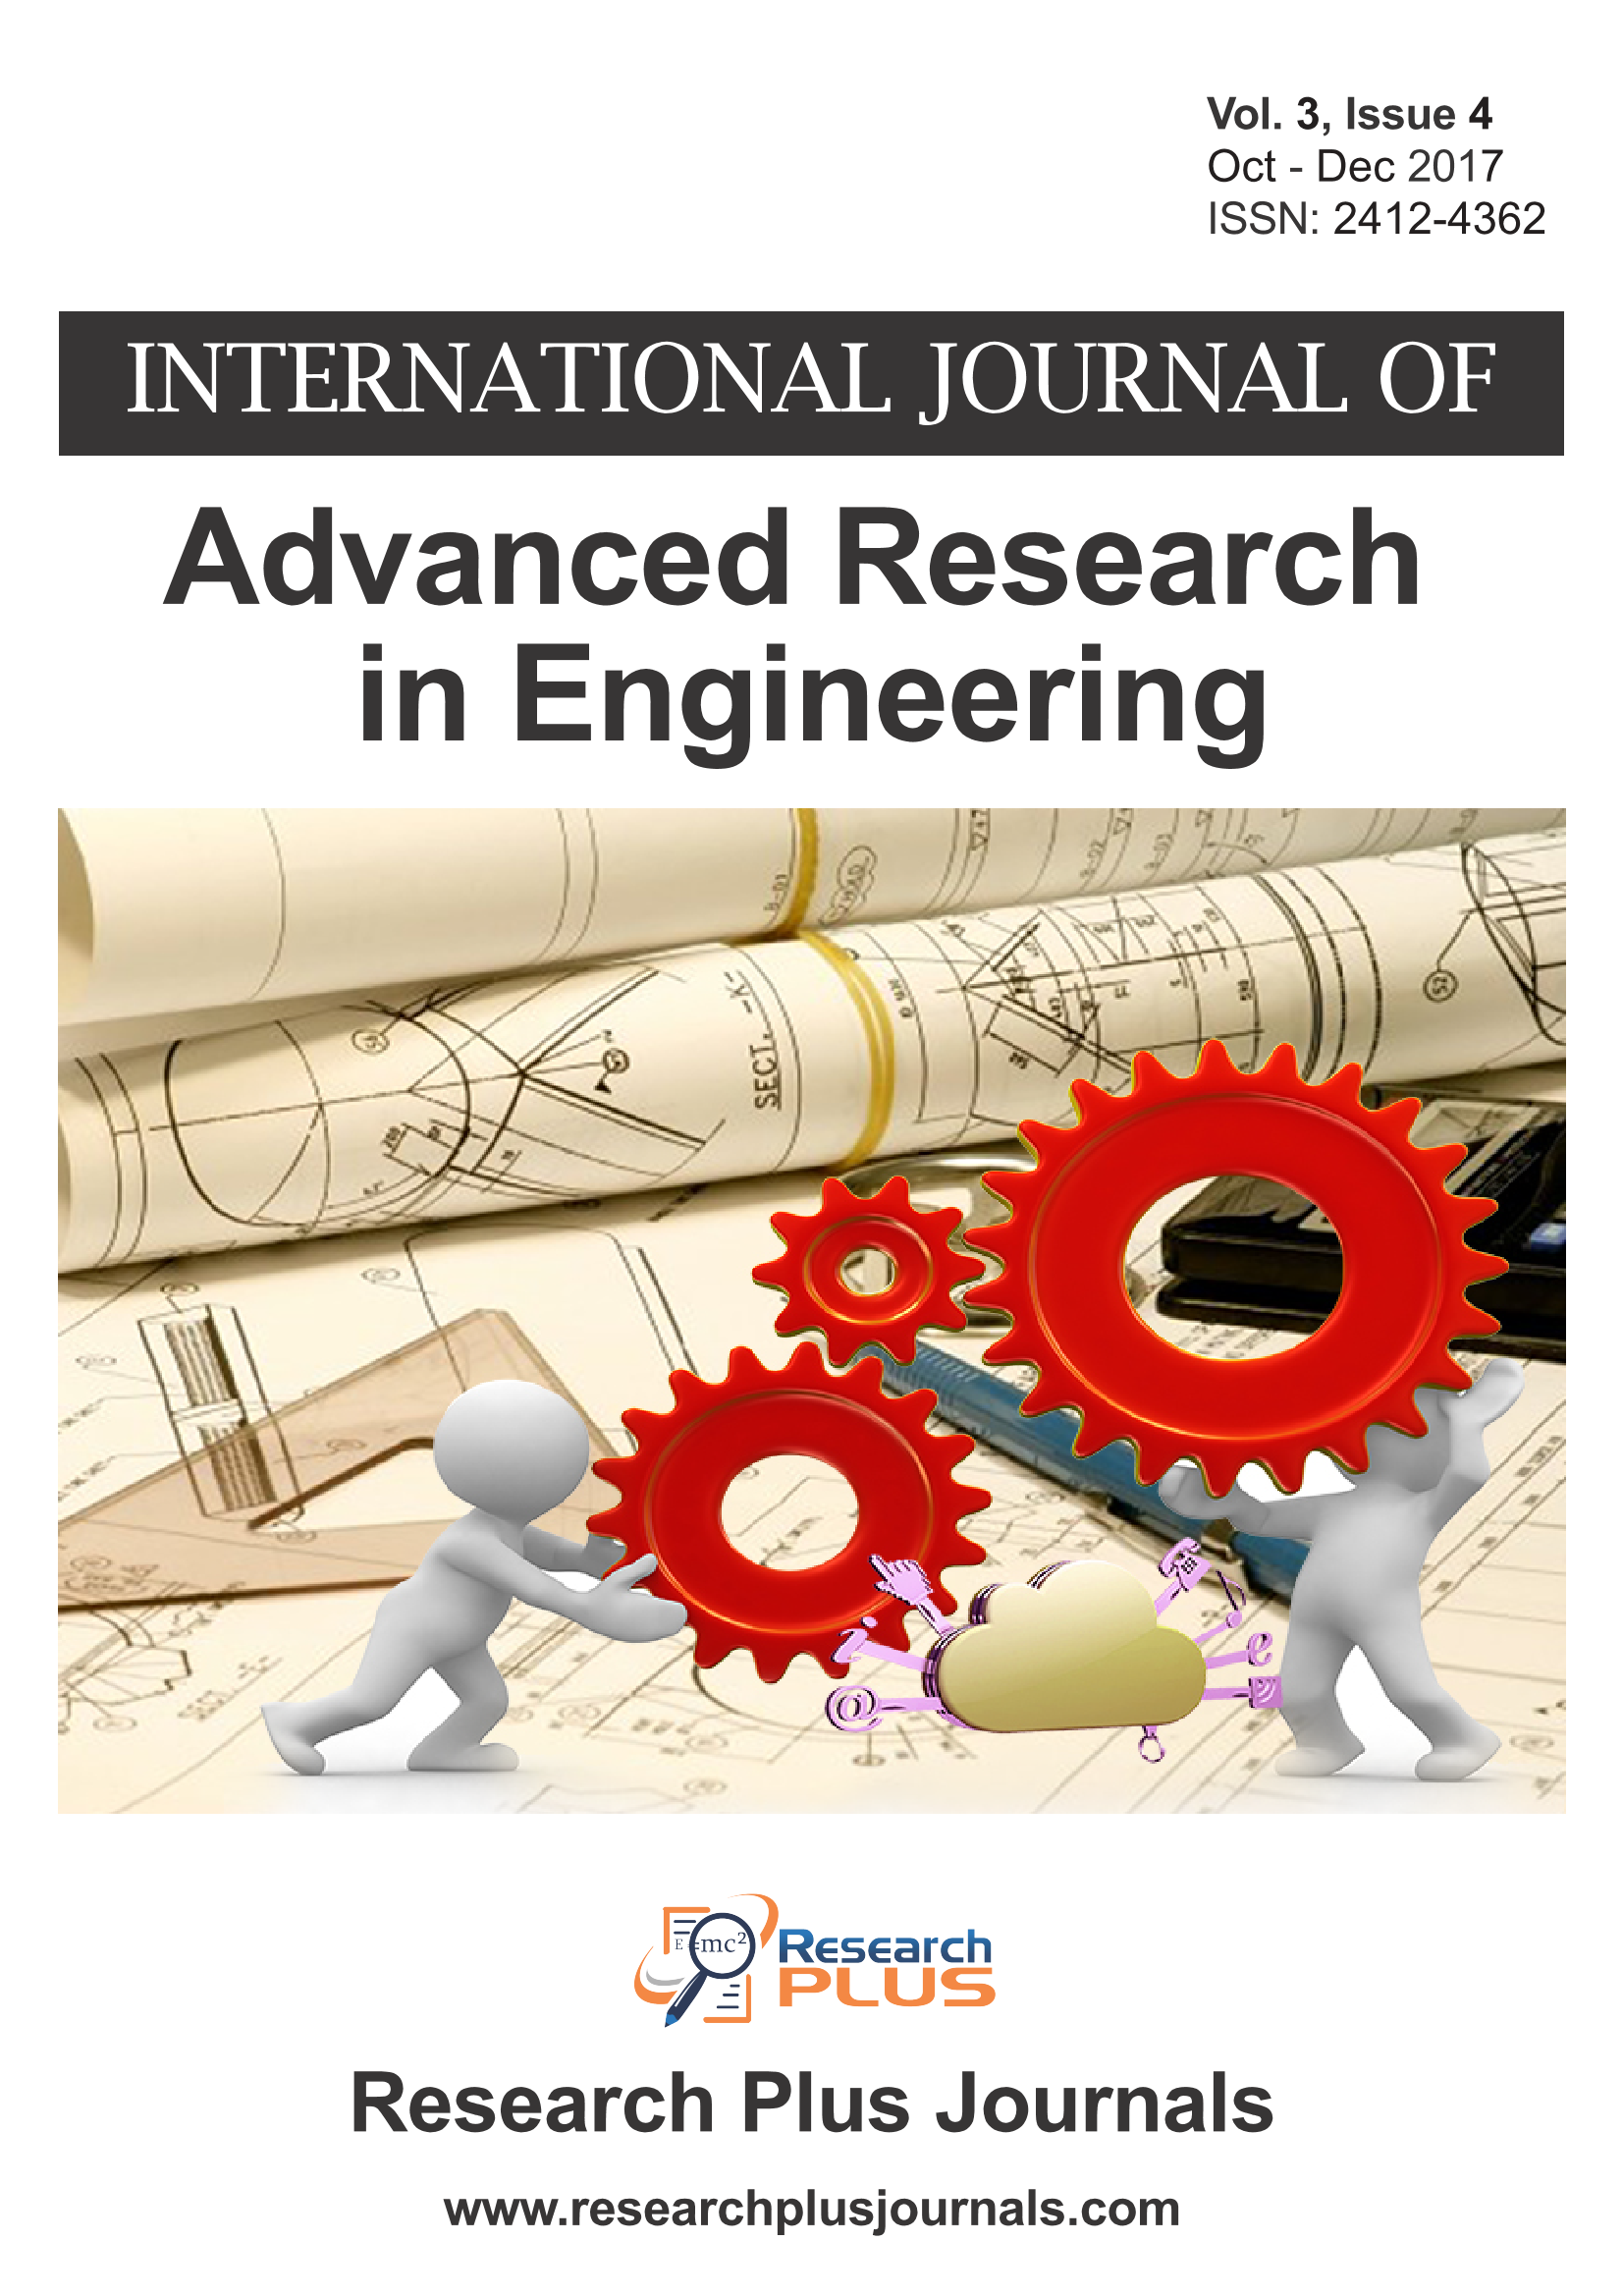 Volume 3, Issue 4, International Journal of Advanced Research in Engineering (IJARE)  (Online ISSN 2412-4362)